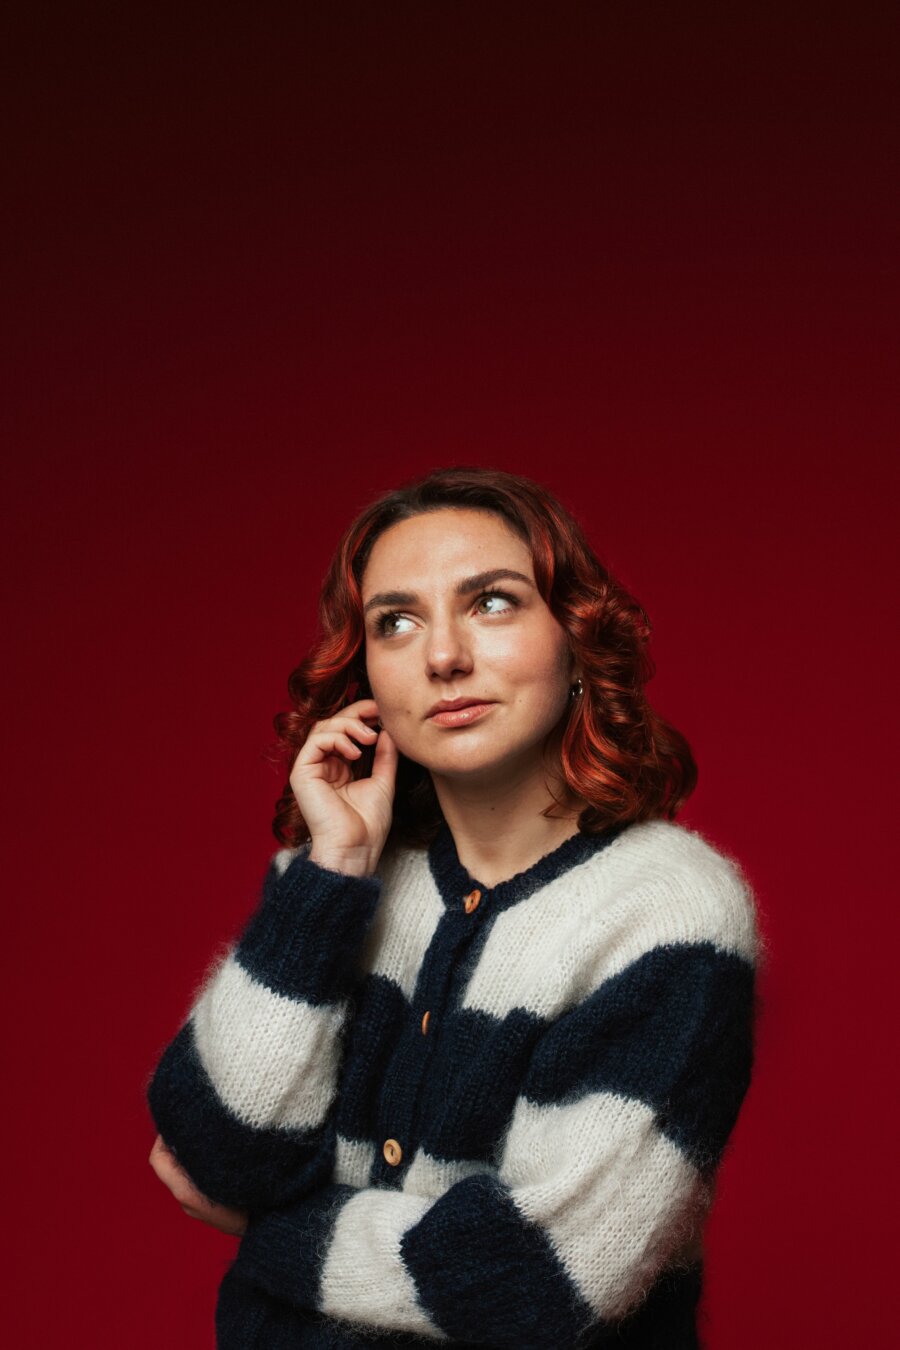 Ania Magliano wearing a black and white cardigan stood against a red background